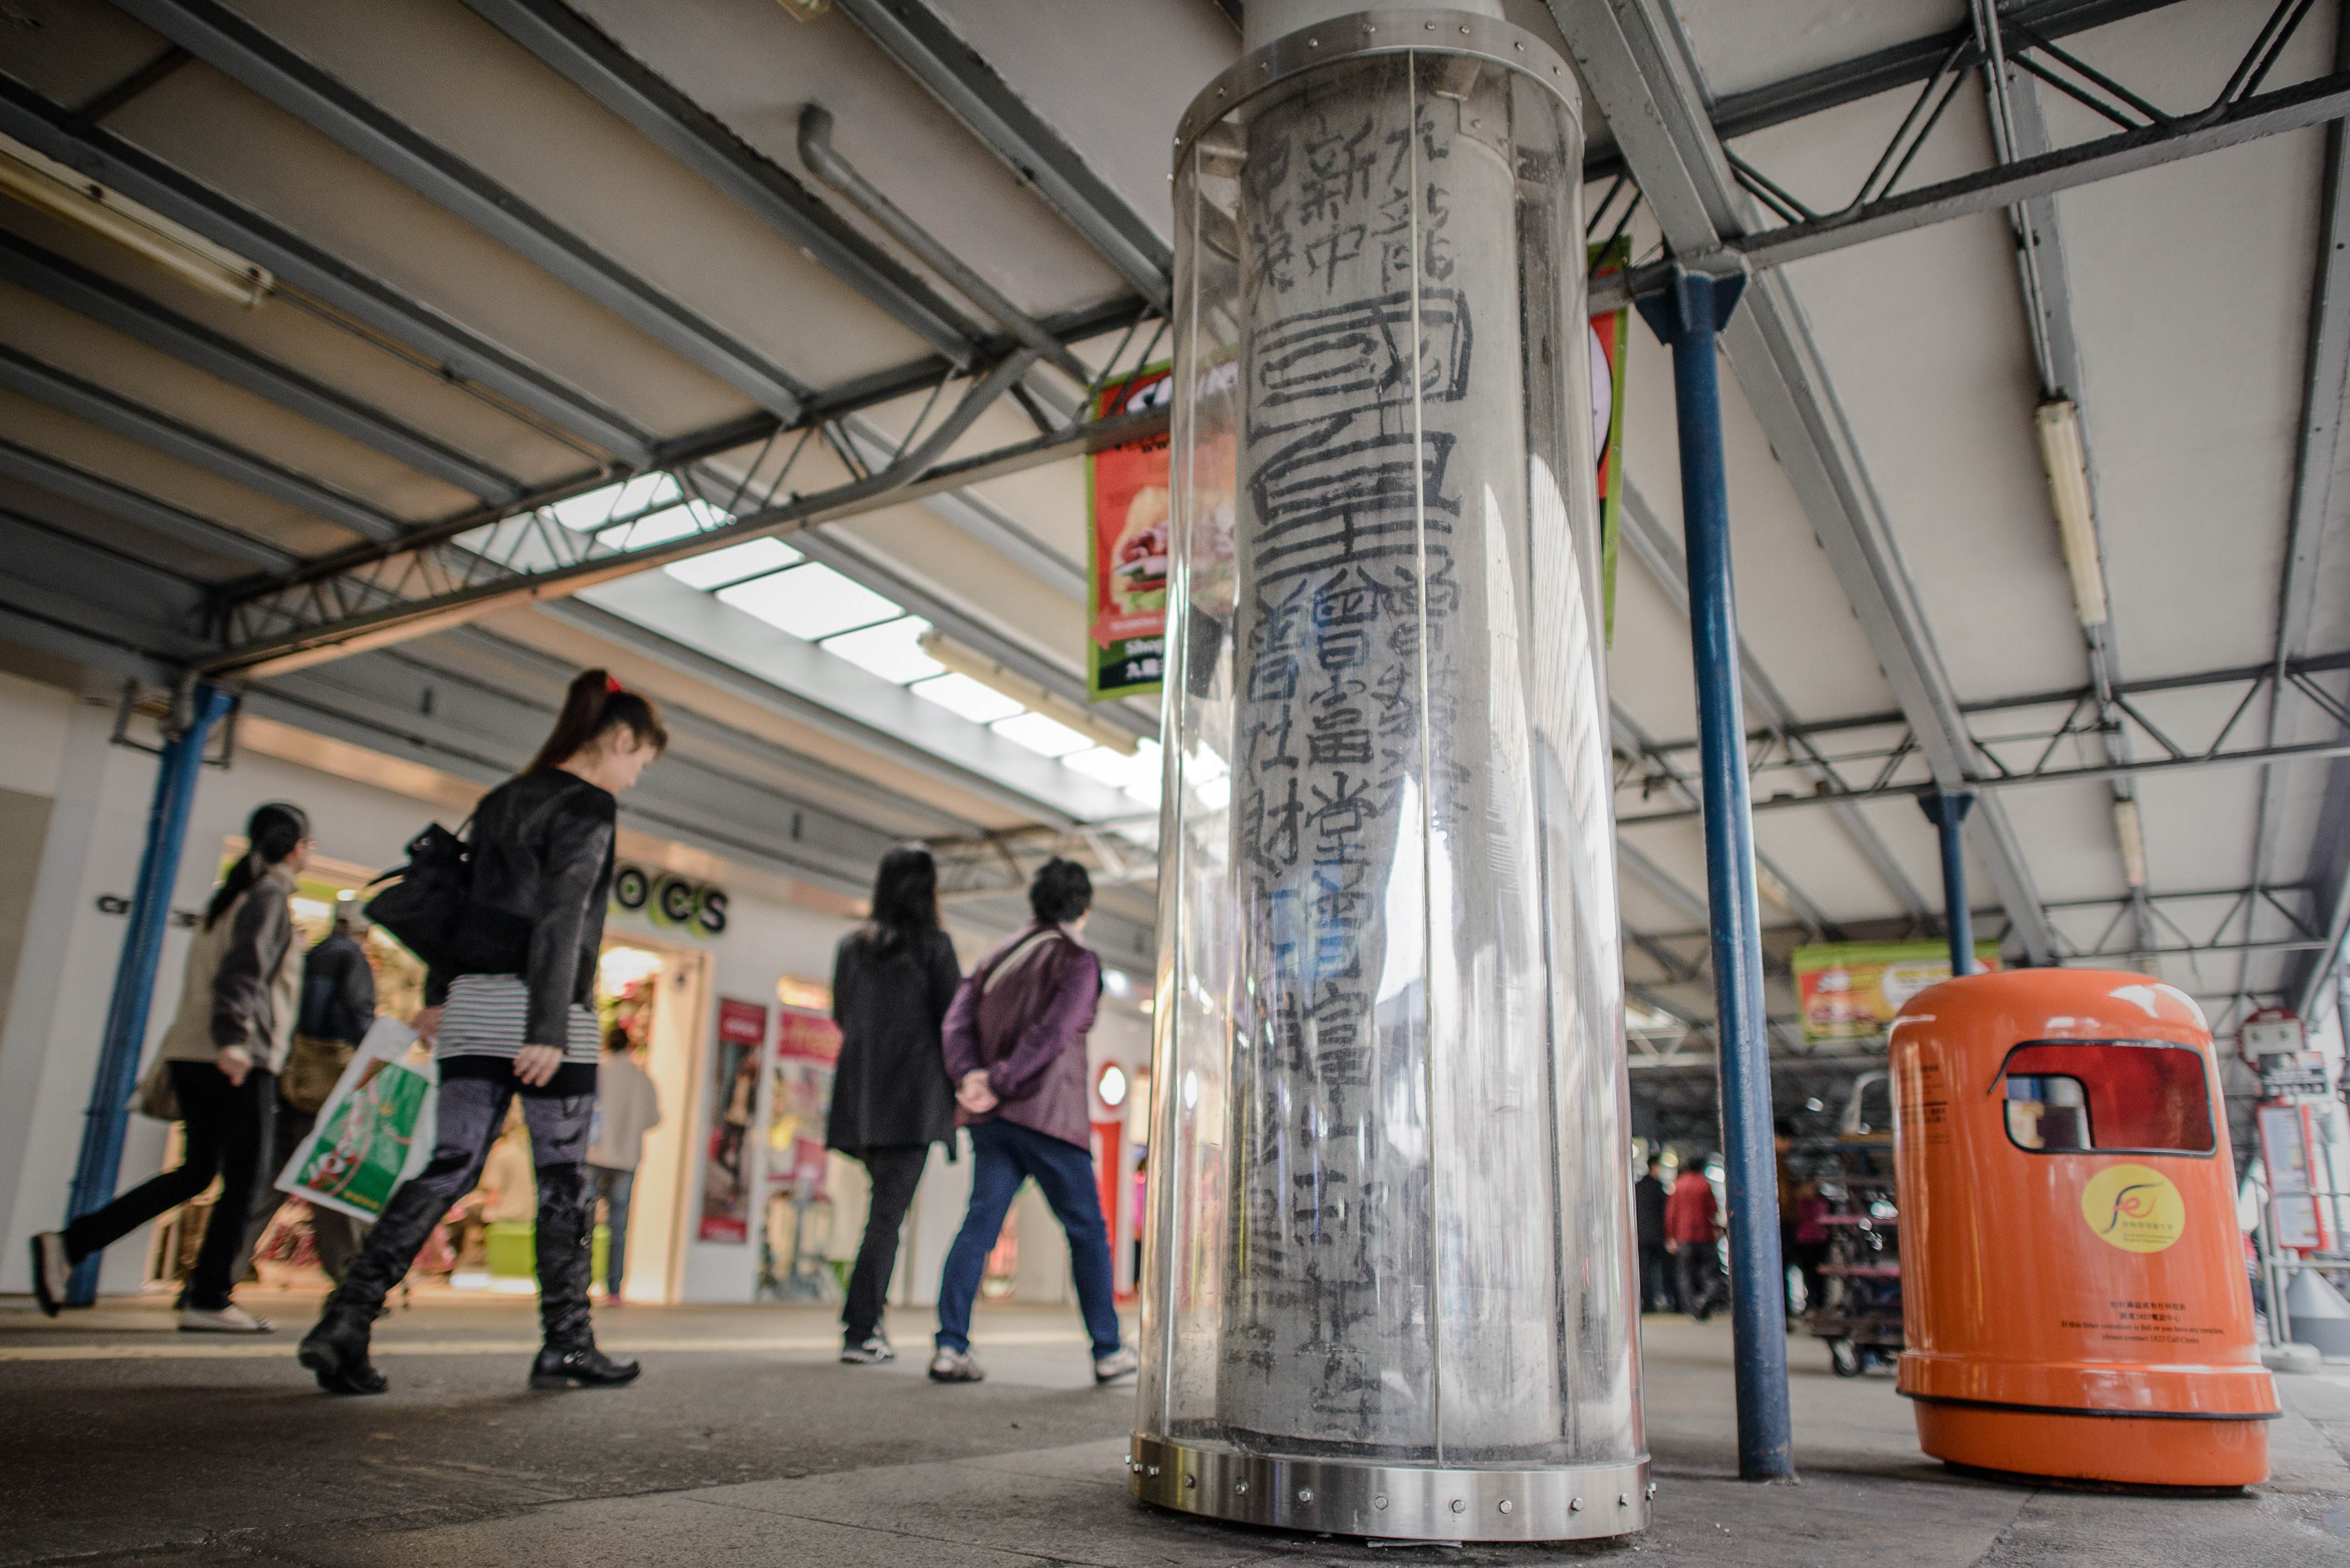 Pedestrians walk past a plastic casing set up around a graffiti made by the late self-declared "King of Kowloon", Tsang Tsou-choi, in Hong Kong. Photo: AFP